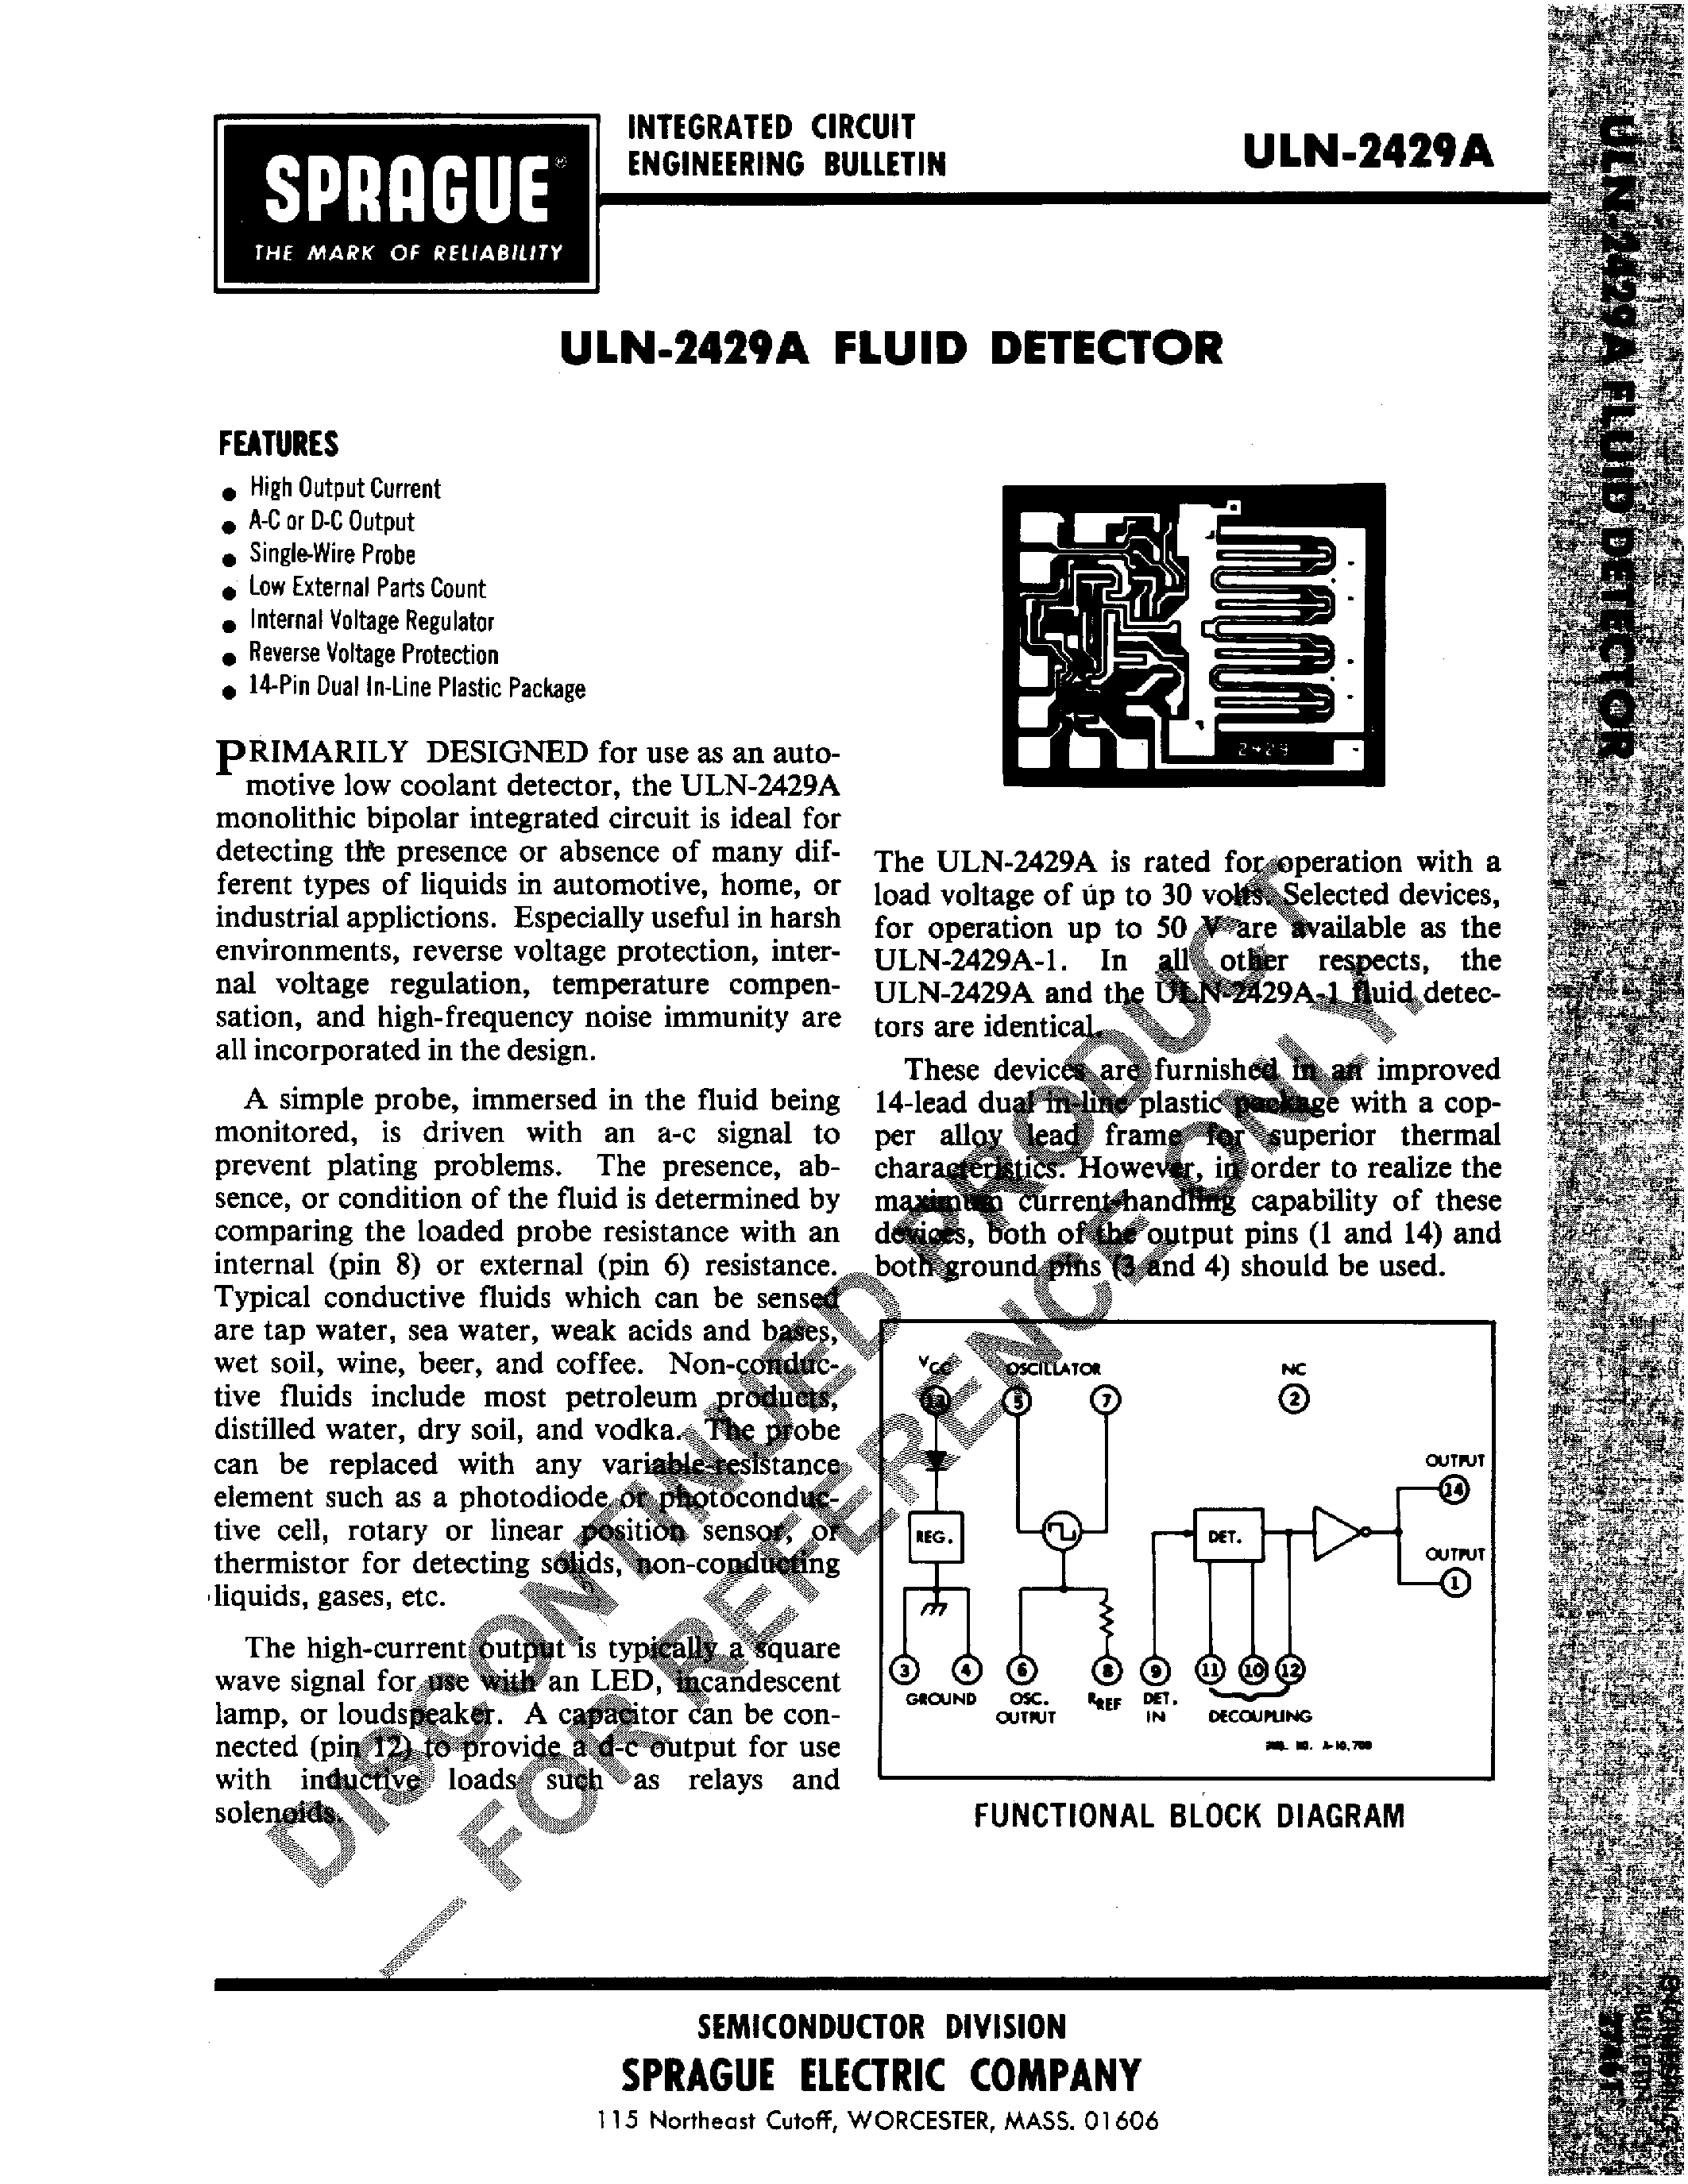 Datasheet ULN2429A - Fluid Detector page 1